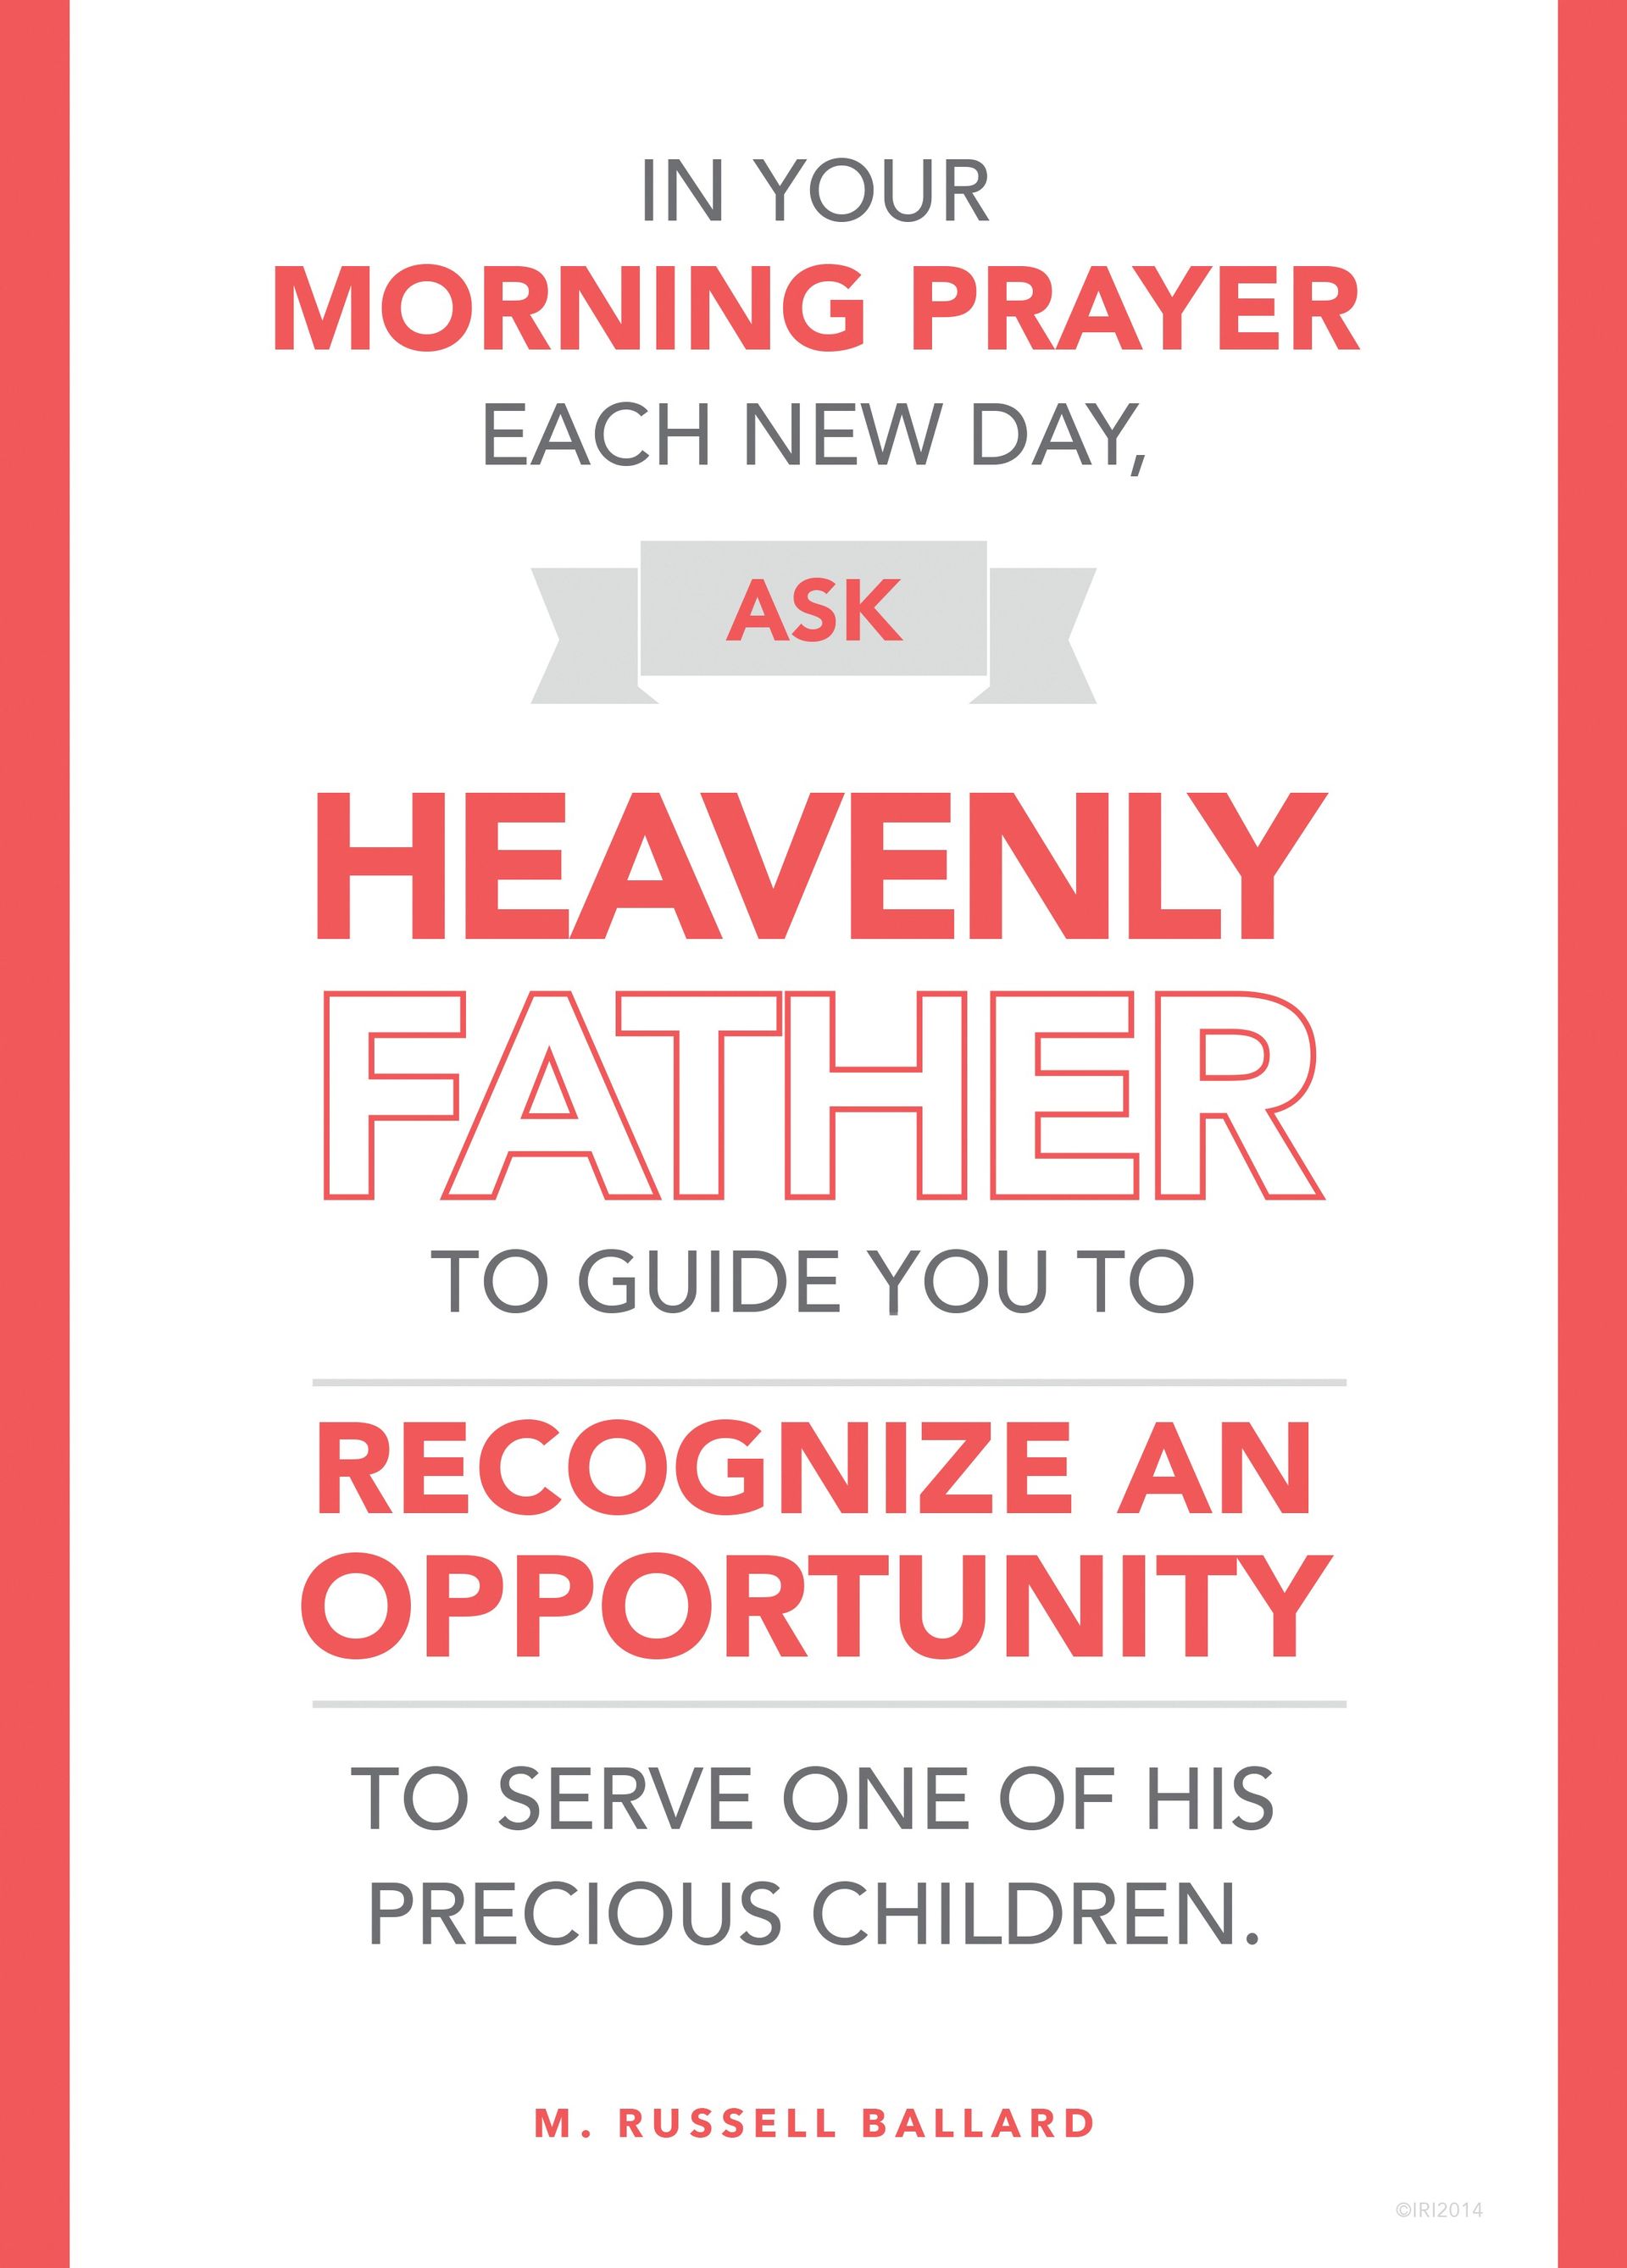 “In your morning prayer each new day, ask Heavenly Father to guide you to recognize an opportunity to serve one of His precious children.”—Elder M. Russell Ballard, “Be Anxiously Engaged”